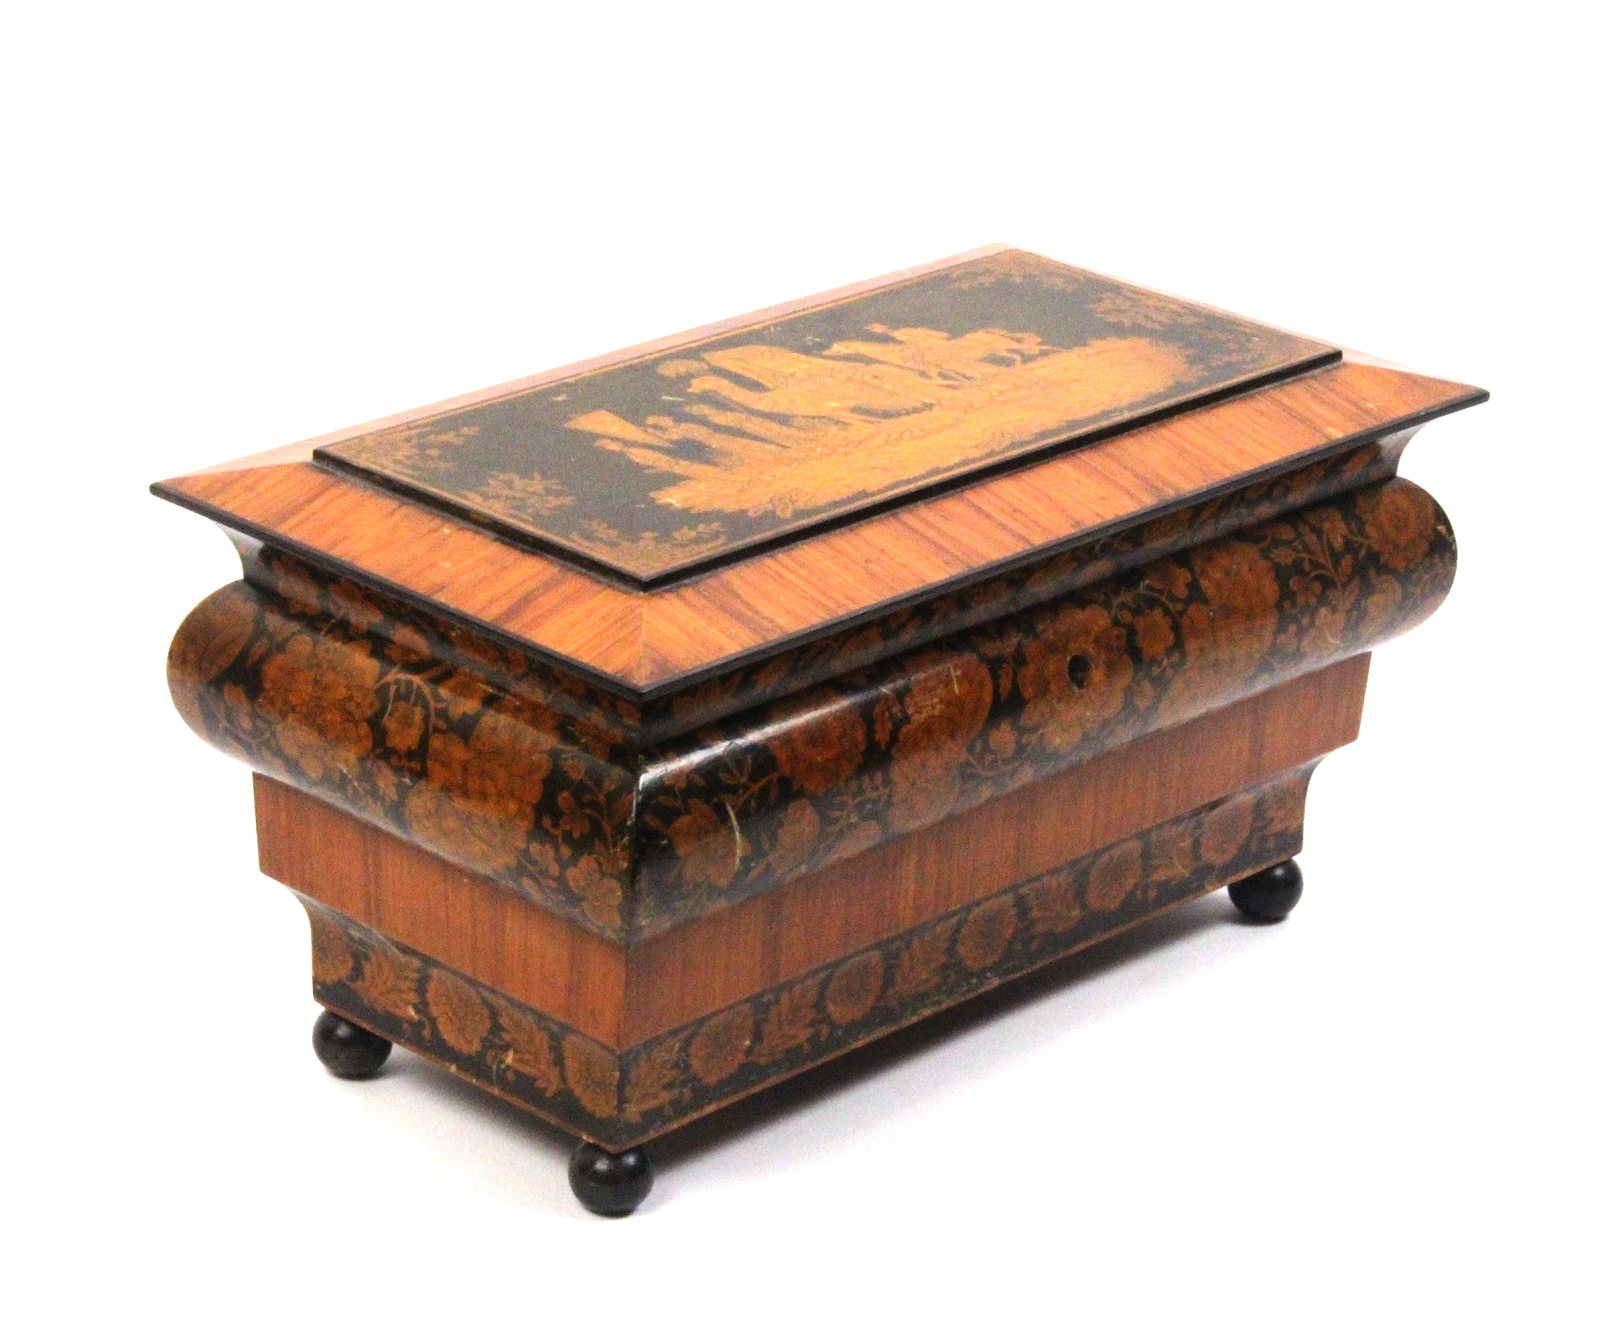 A fine Regency penwork tea caddy of ogee rectangular form, the stepped sides with twin bands of